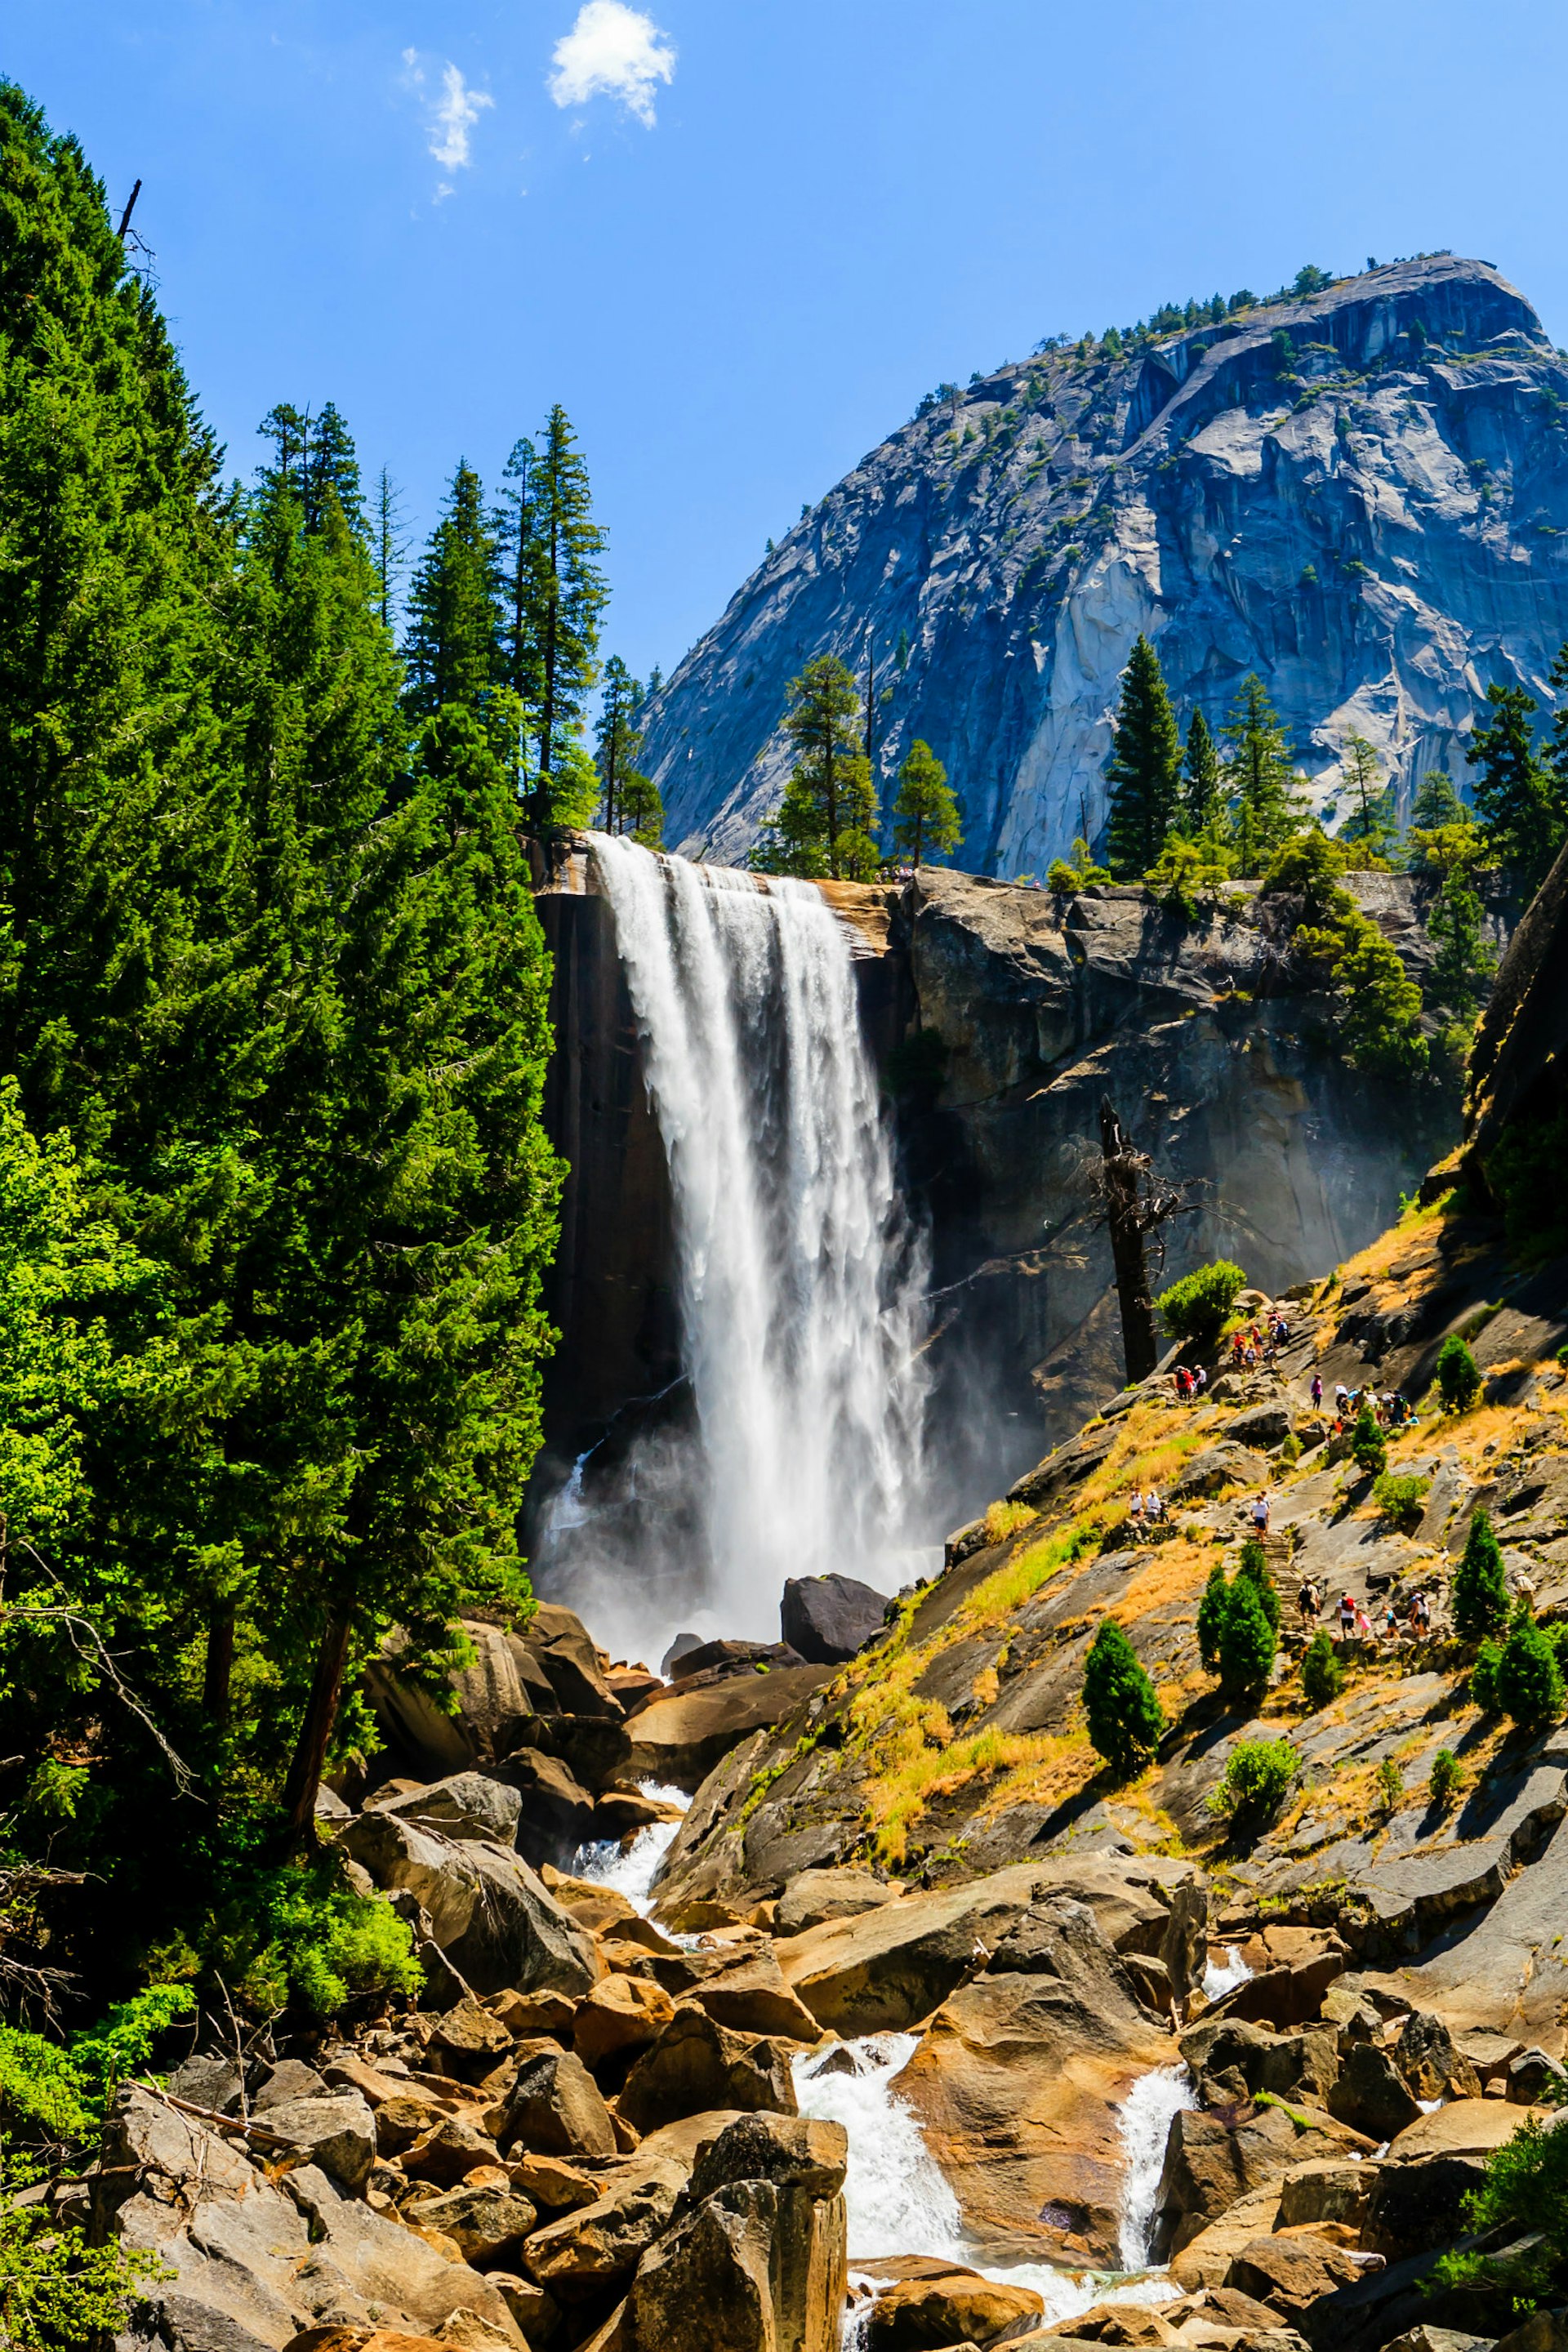 A beautiful waterfall flows over giant boulders with a mountain rising up behind. National Parks: The best free things to do in the US parks